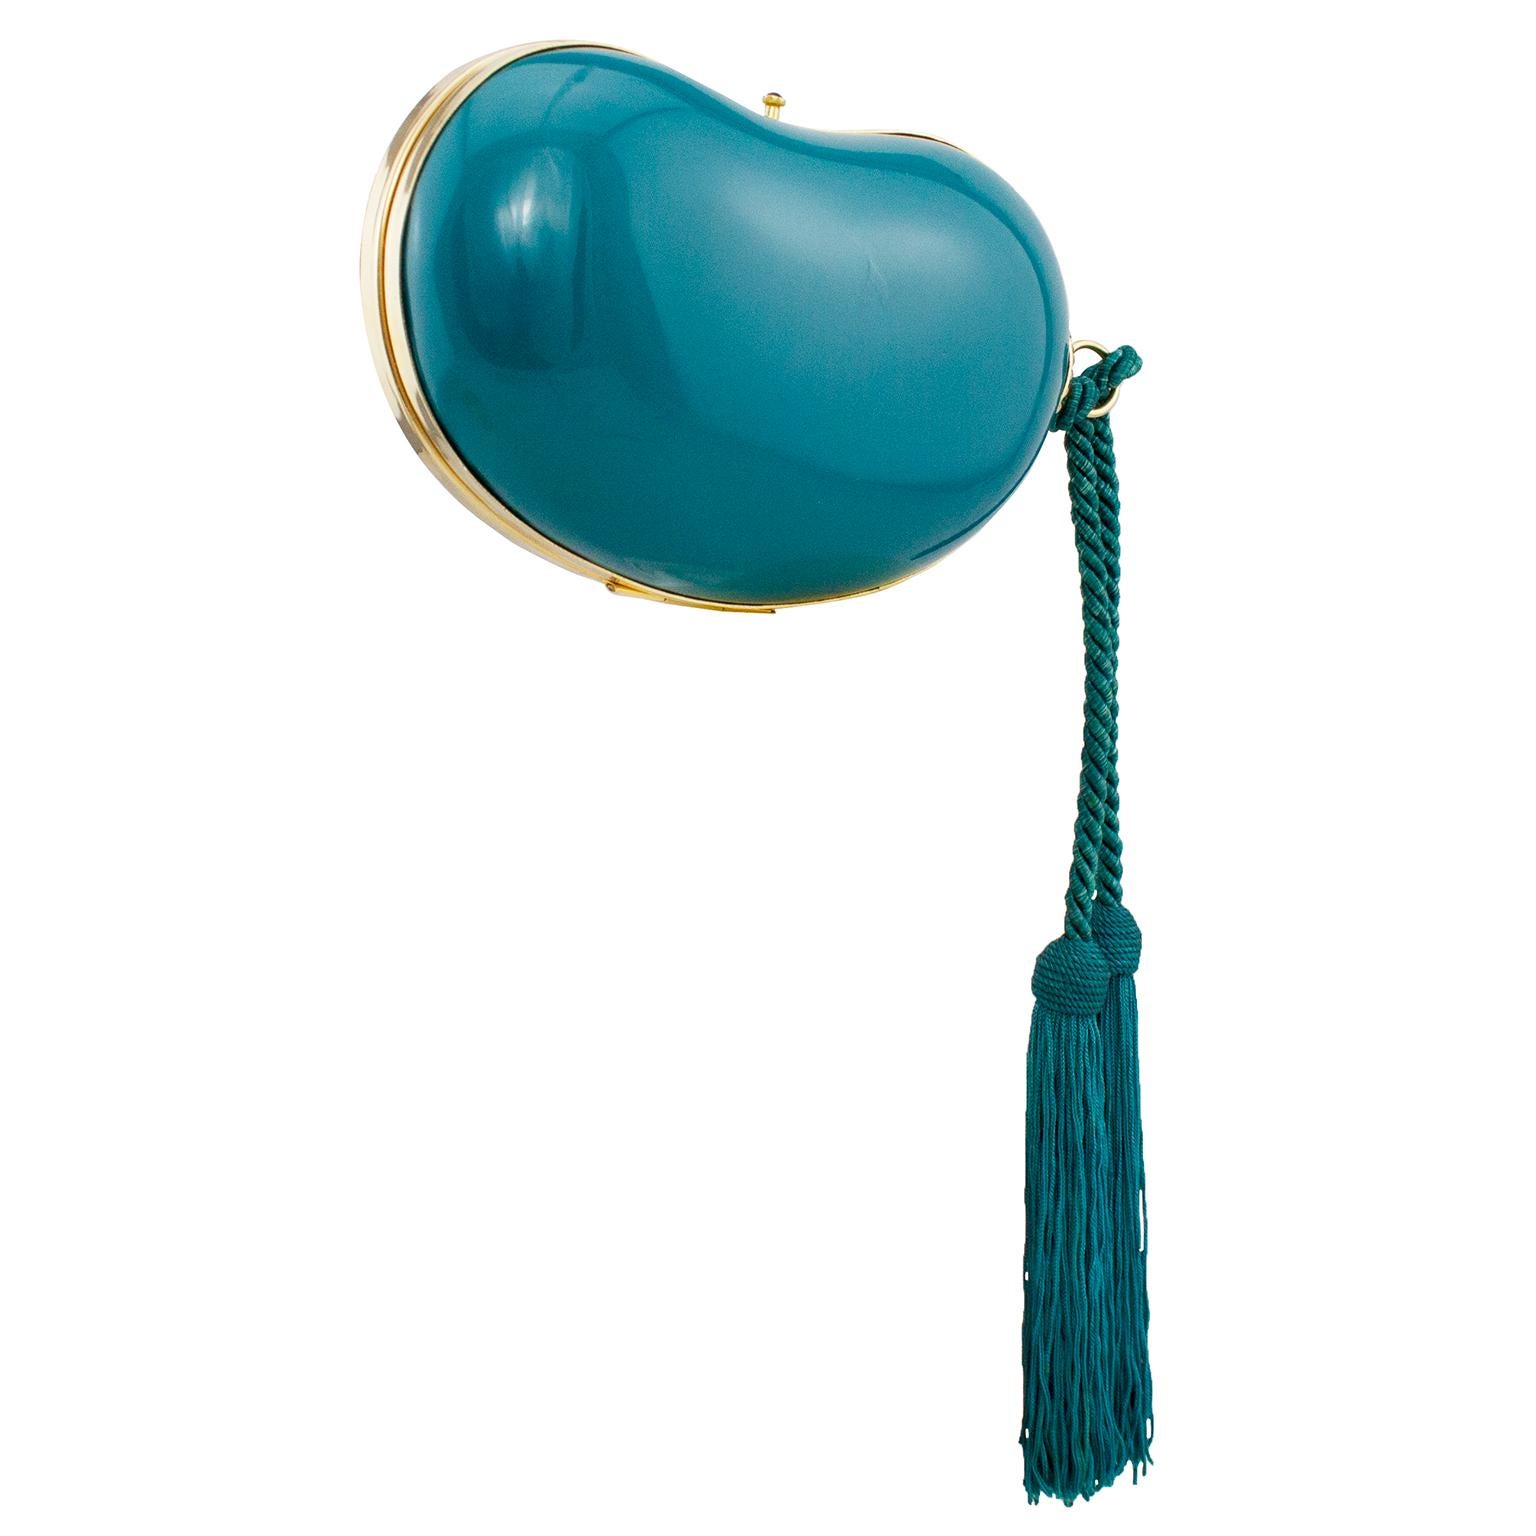 Fabulous hard clutch dating from the 1970s. Shaped like the Elsa Peretti bean, this is in a rich deep teal colour and is contrasted with gold tone metal trim and hardware. Twisted  teal silk rope with two large tassels. Tiny black cabochon clasp